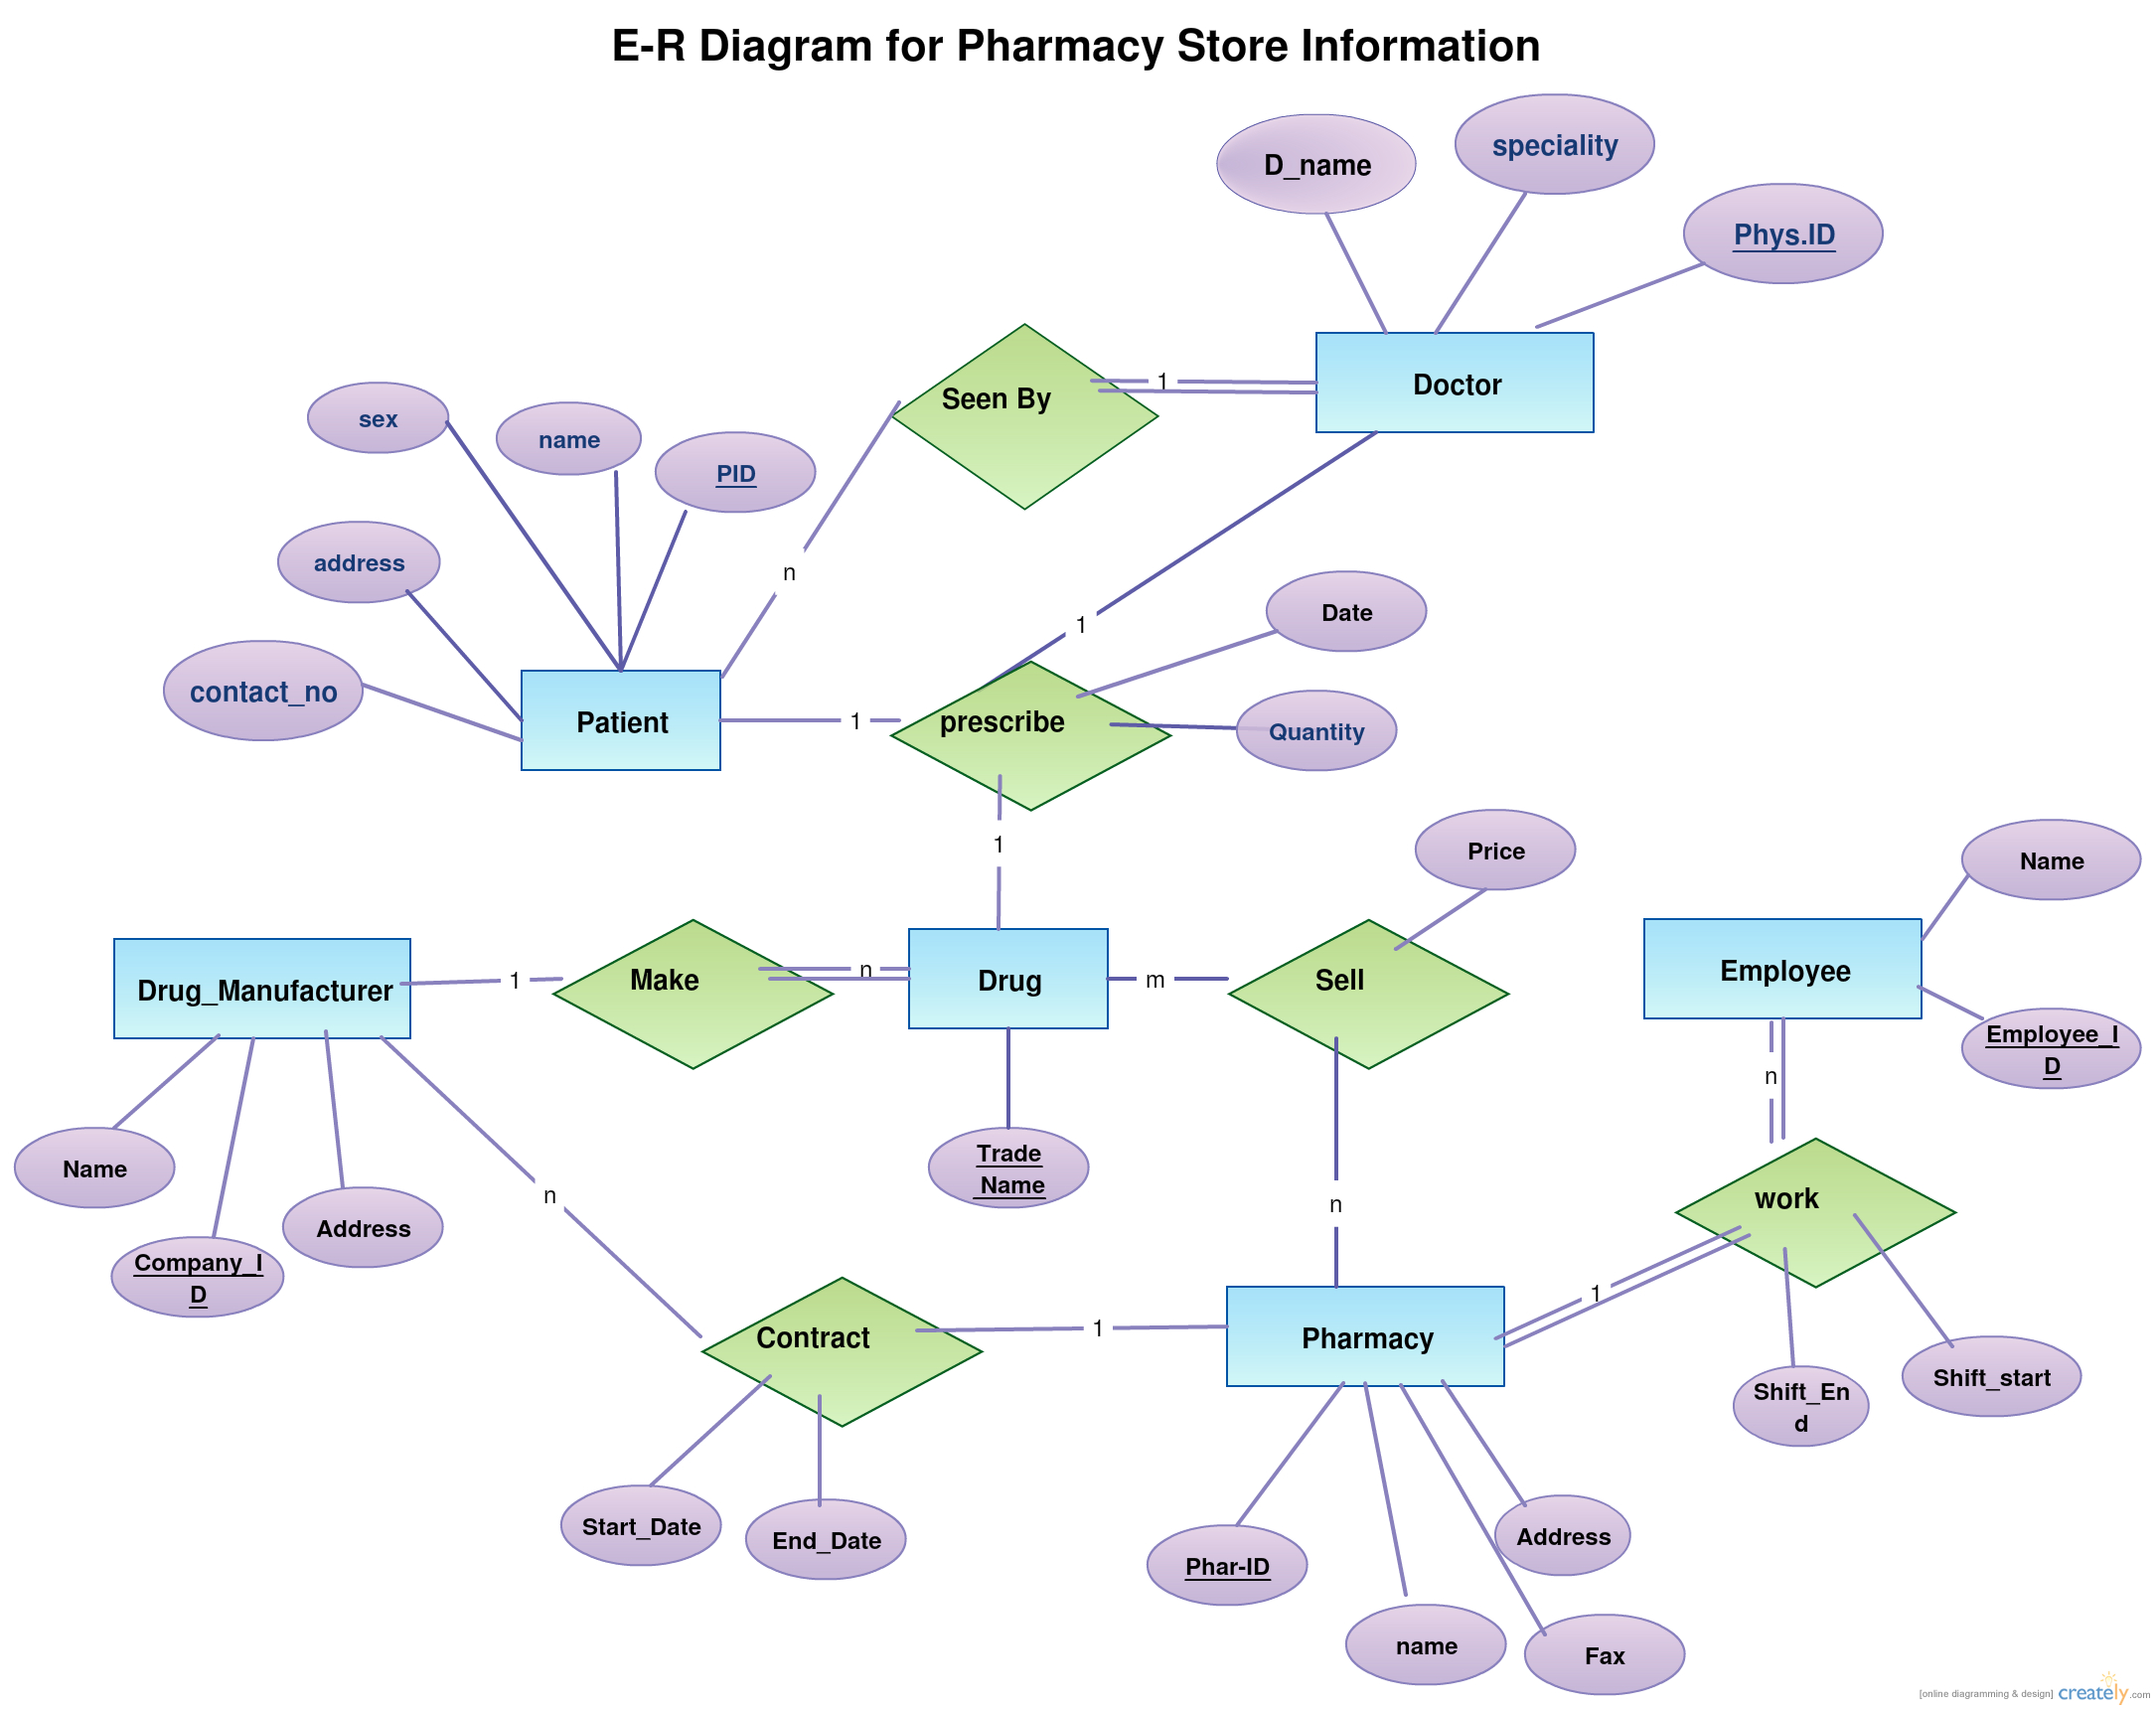 An Er Diagram Of Pharmacy. This Er Diagram Is Created And Shared regarding Er Diagram Examples For Travel Agency